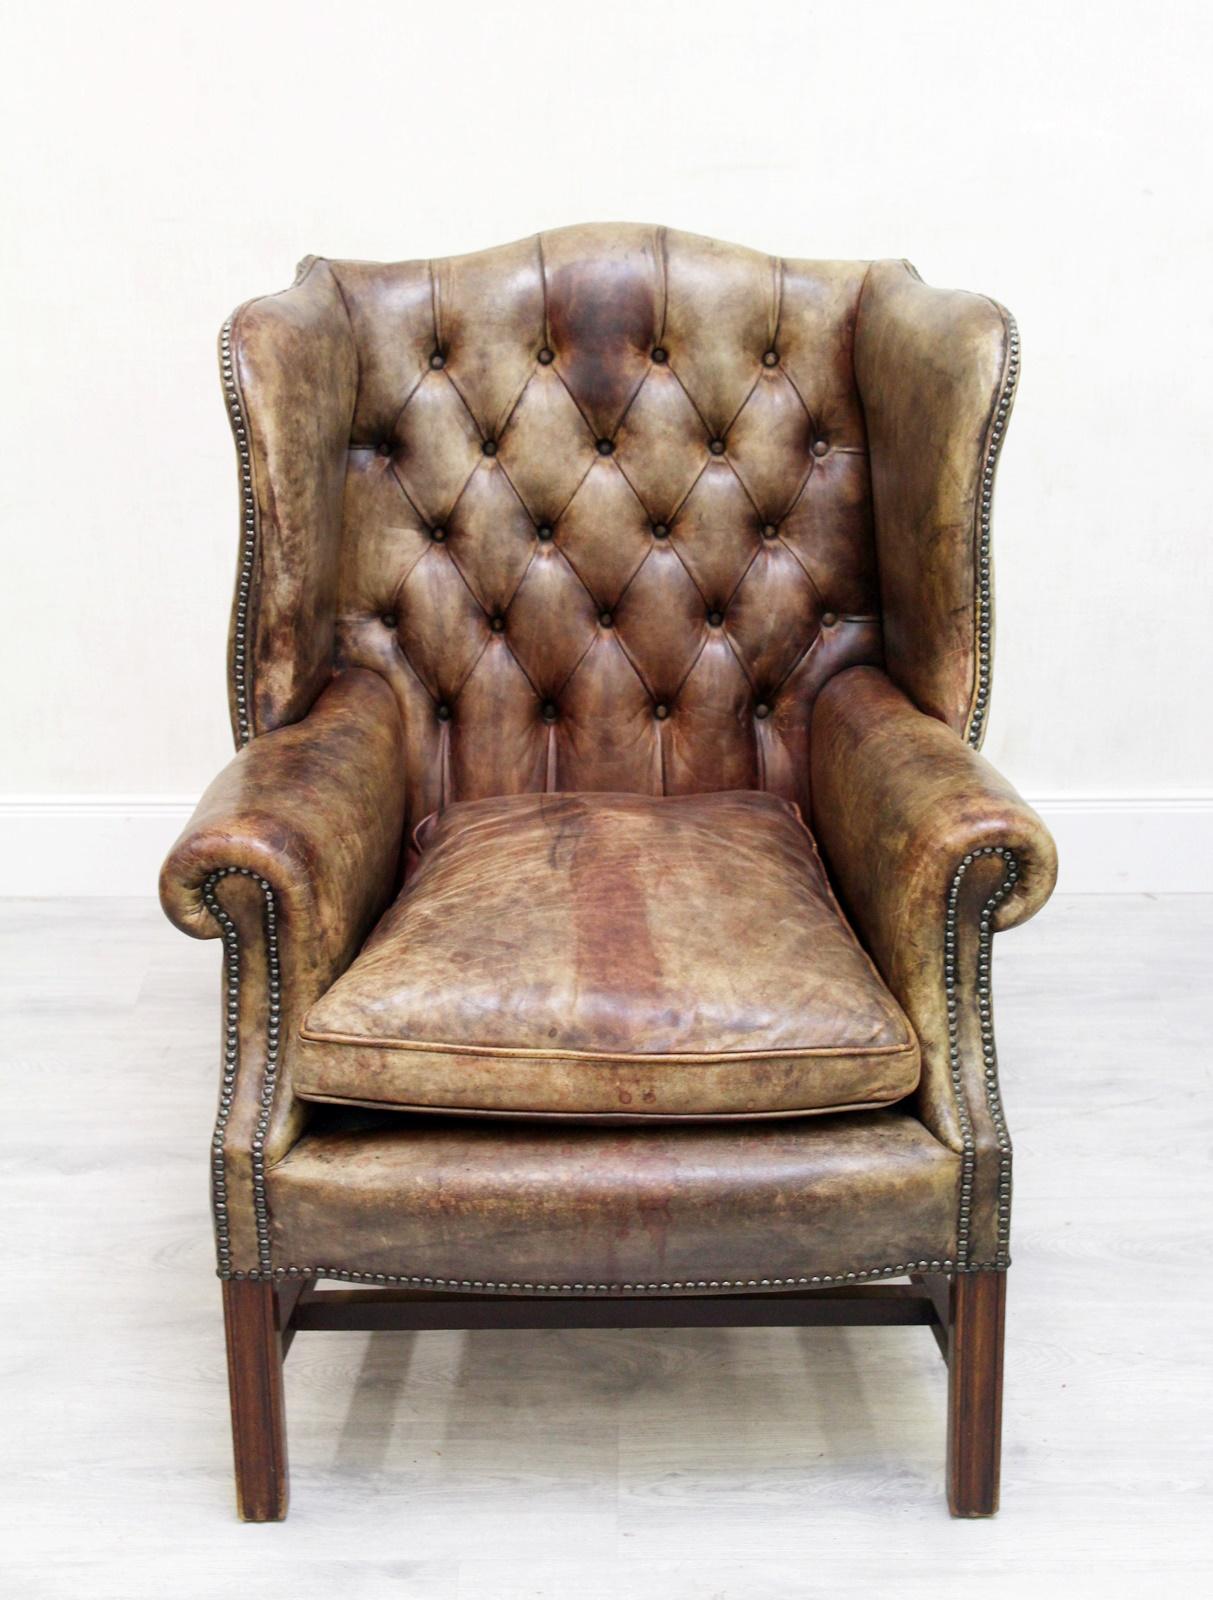 2 armchairs Antik
The shape is Classic (wing chair)
armchair
Measures: Height x 102cm, width x 80cm, depth x 85cm
Color: brown / gray
Pillows: down pillows
Condition: The armchairs are in a very good condition for the age and still have the